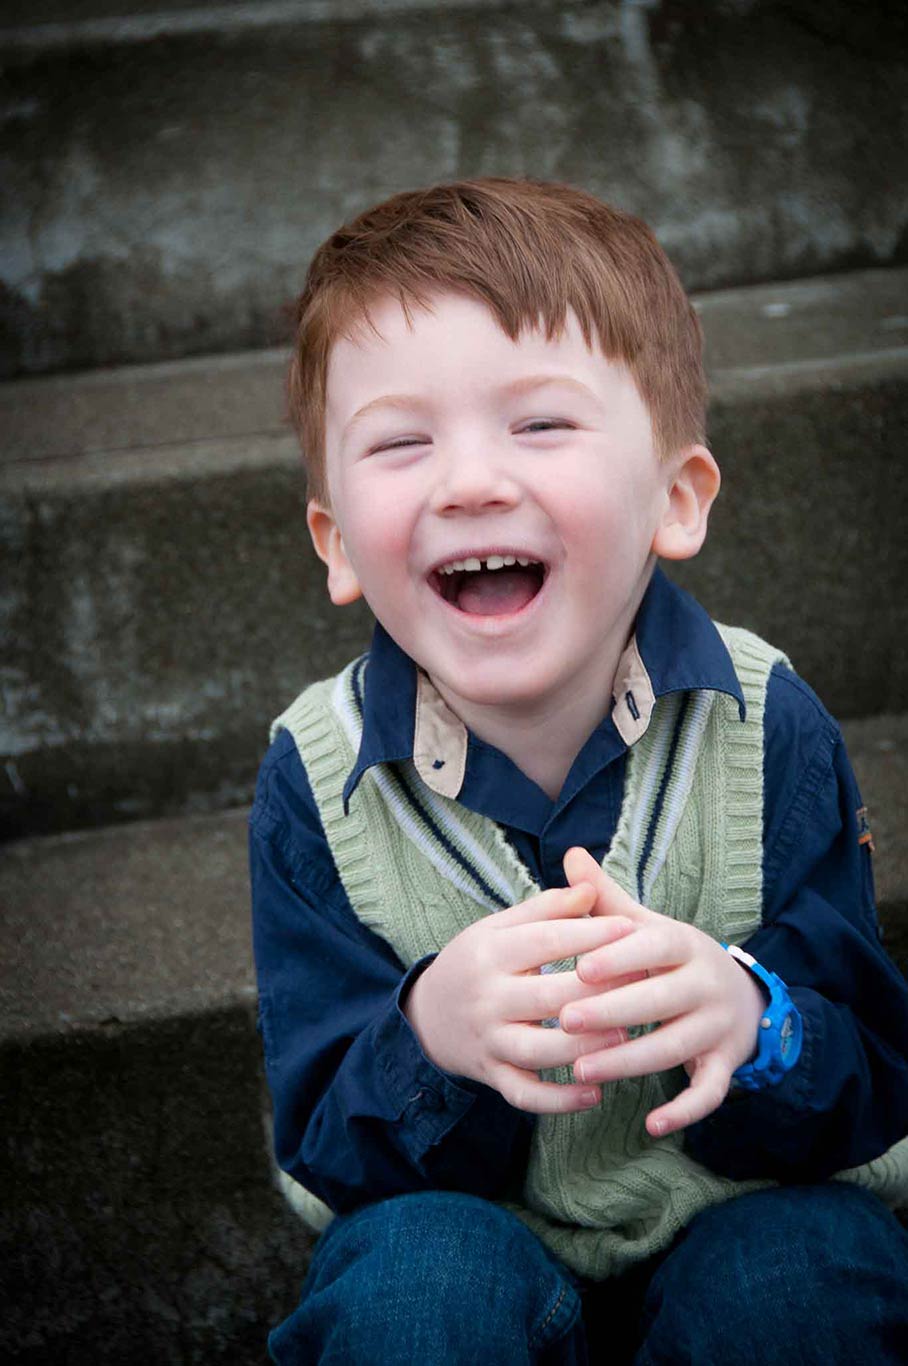 portrait of a laughing young boy in a blue and green sweater.